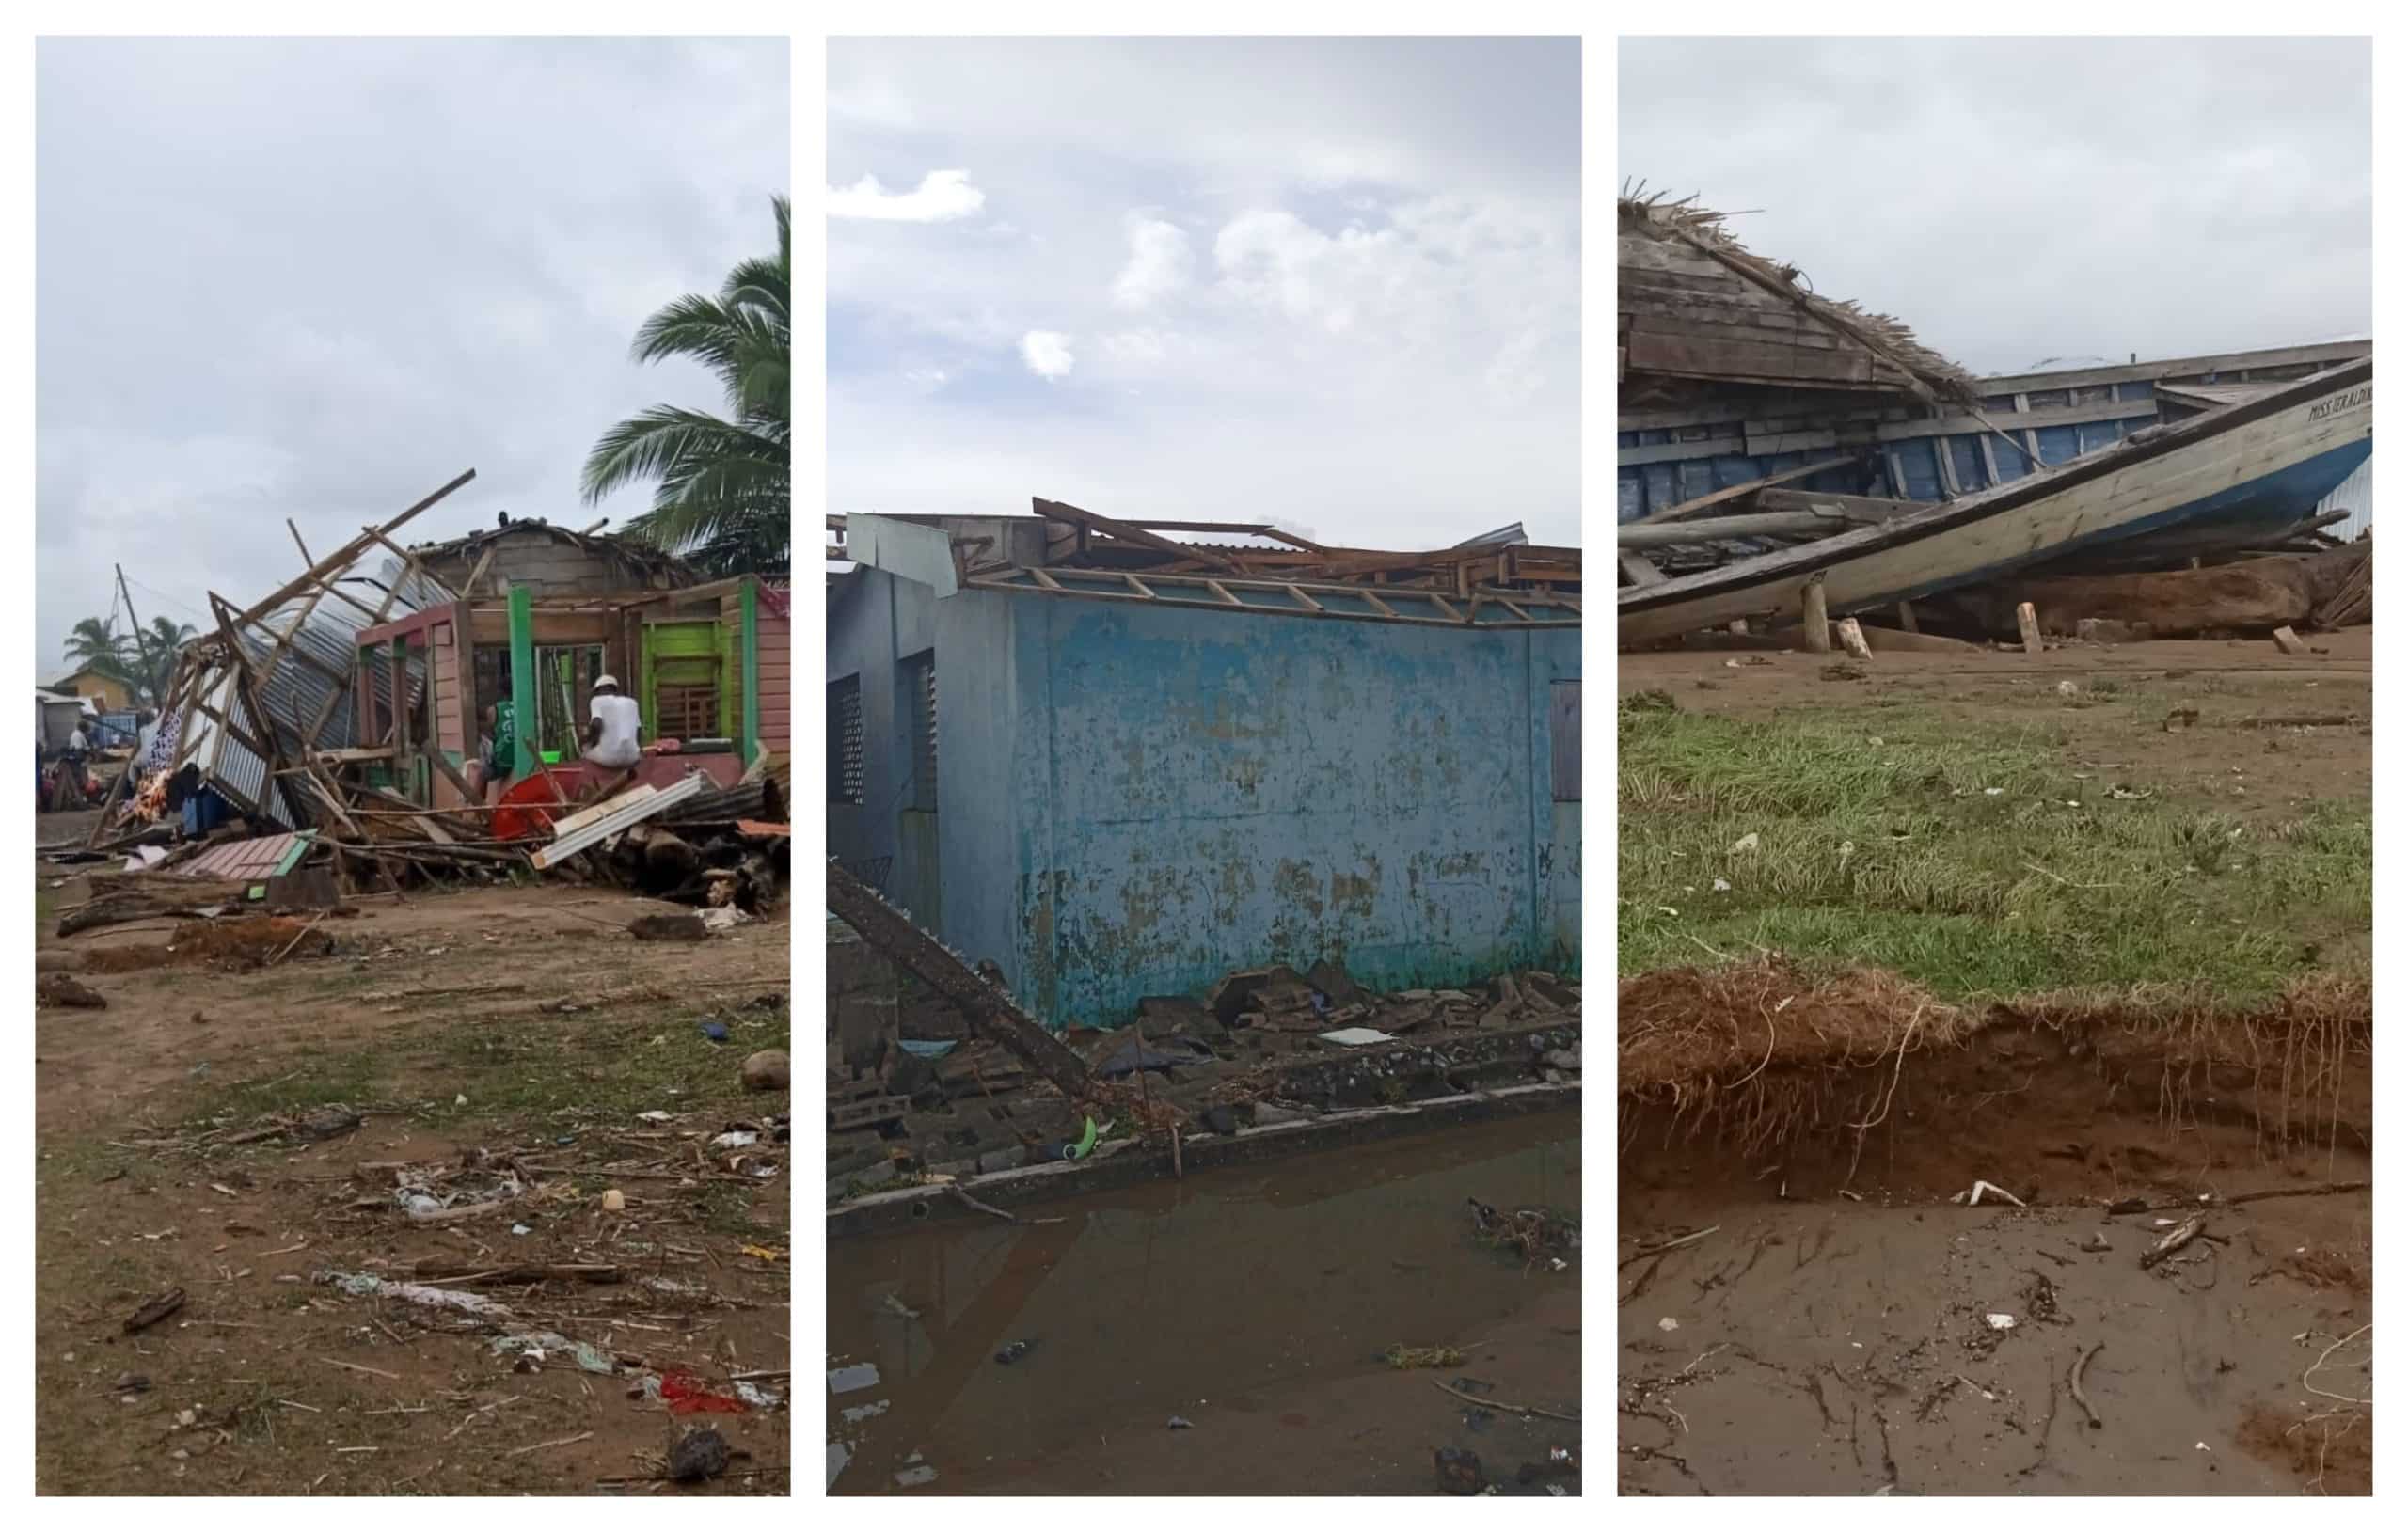 Residents request to send aid to the Tasbapauni community, in the South Caribbean